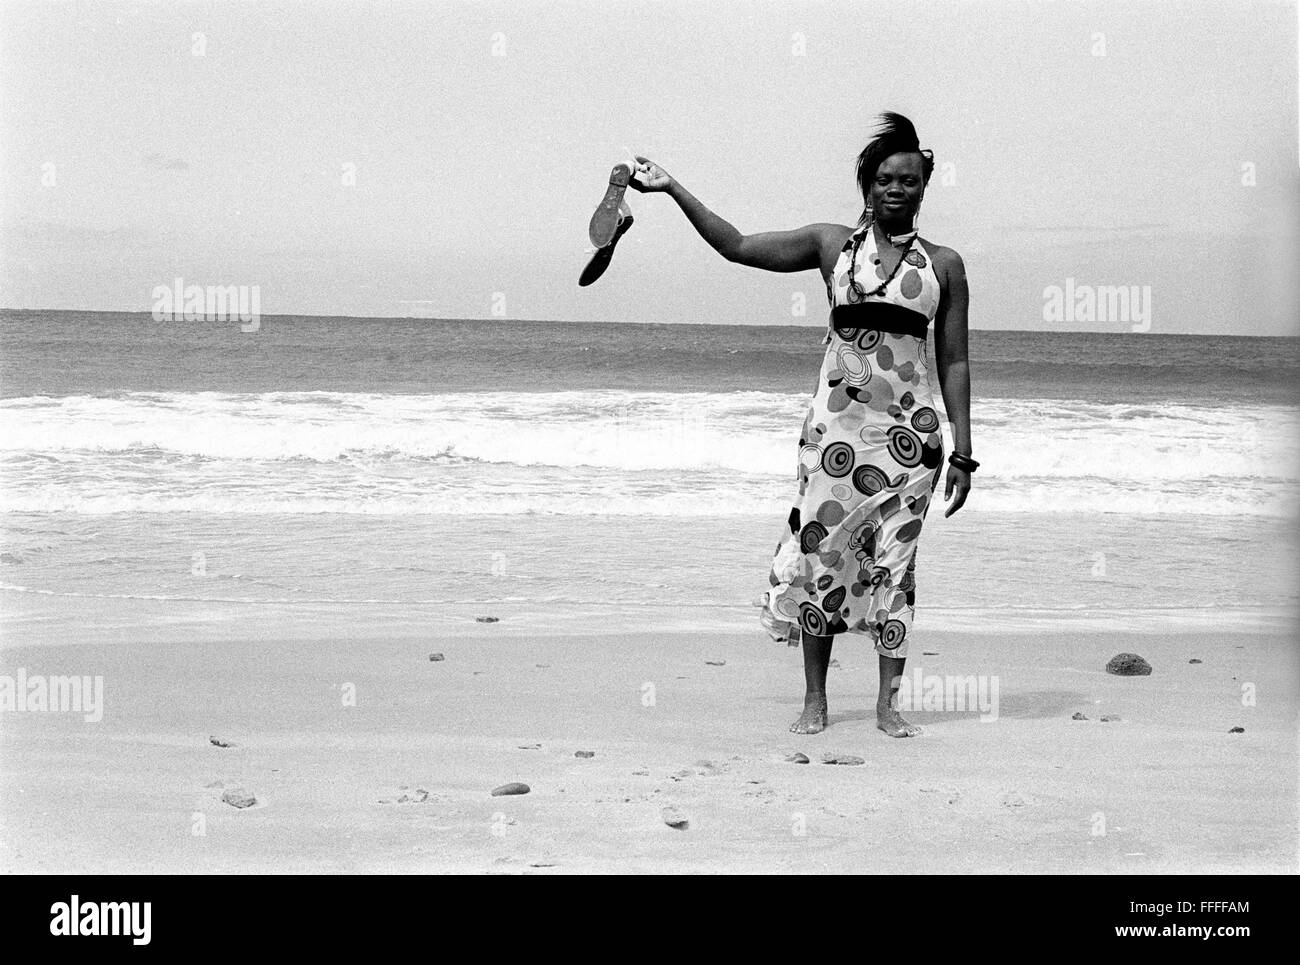 Jan 4, 2016 - South Beach, KwaZulu-Natal, South Africa - A woman on vacation from Maputo in Mozambique. South Beach is a part of the City of Durban's longest uninterrupted stretch of beach sand. The City of Durban is on the eastern seaboard of South Africa and the people here are washed with the warm waters of the Indian Ocean. To the north of this stretch of sand are beaches with cafe society hang outs. To the south there is a pier with the upmarket Moyo's Restaurant at it's end and the uShaka Marine World complex and the private surf and sea clubs of the Vetches Beach area. Between these nor Stock Photo